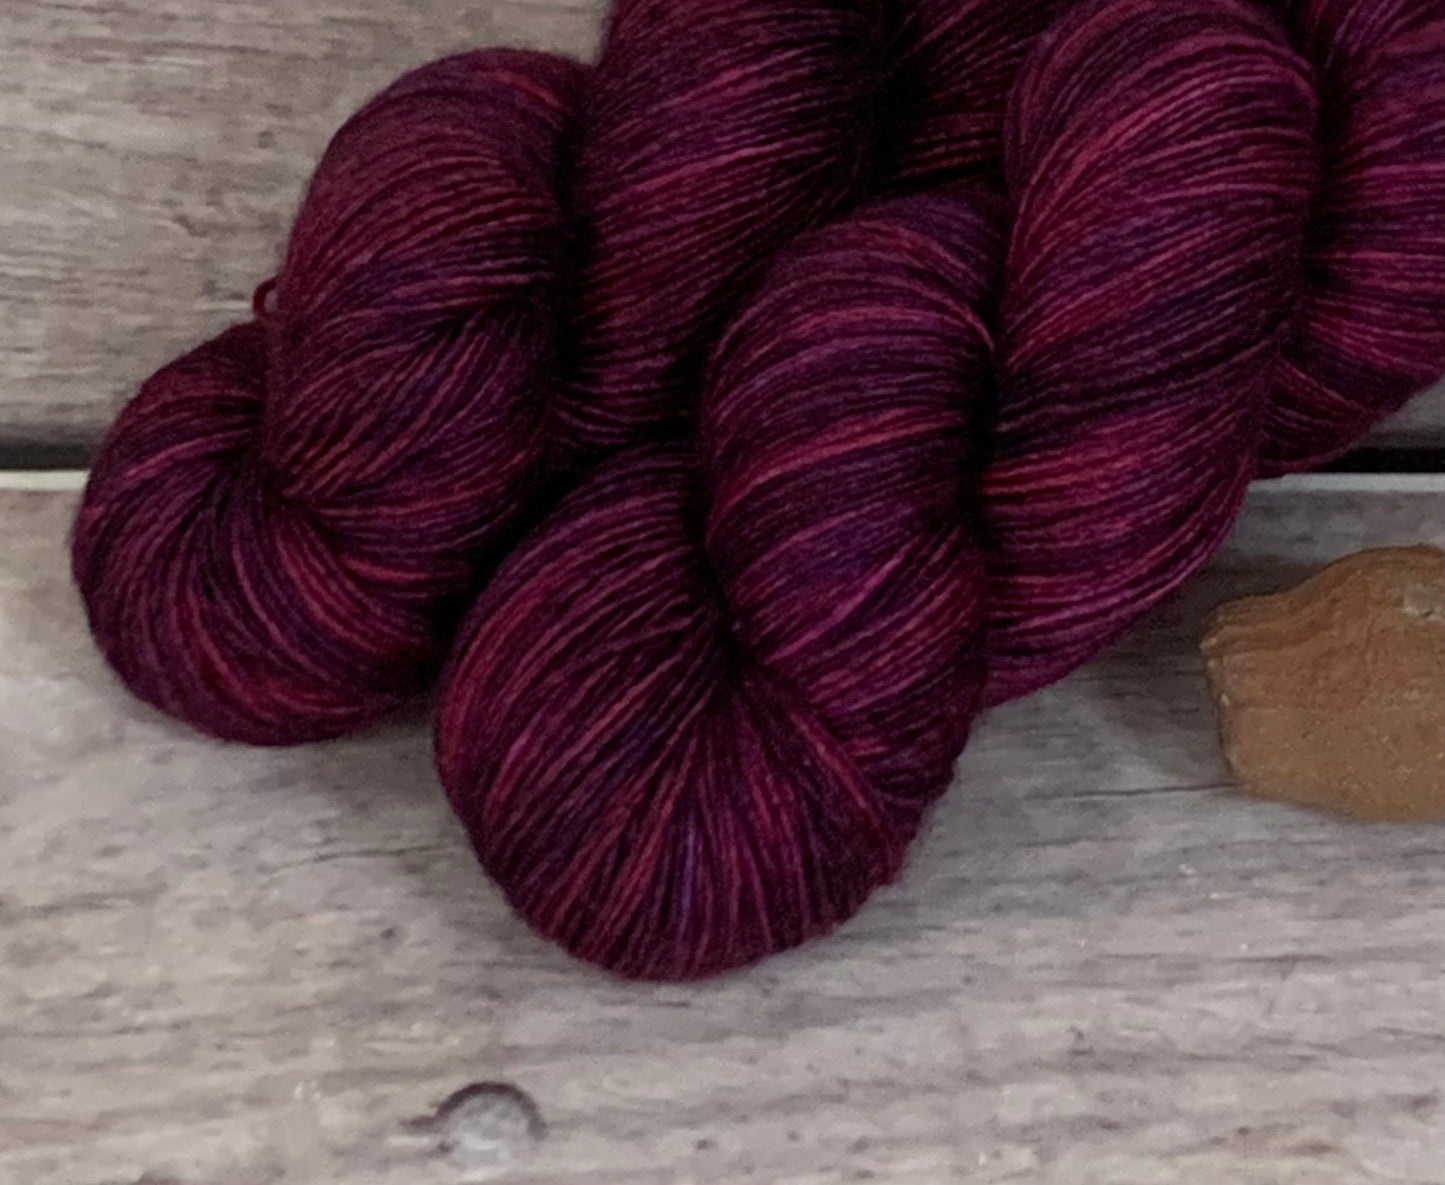 Wild Orchid - Merino and silk 4 ply single -Osmanthus